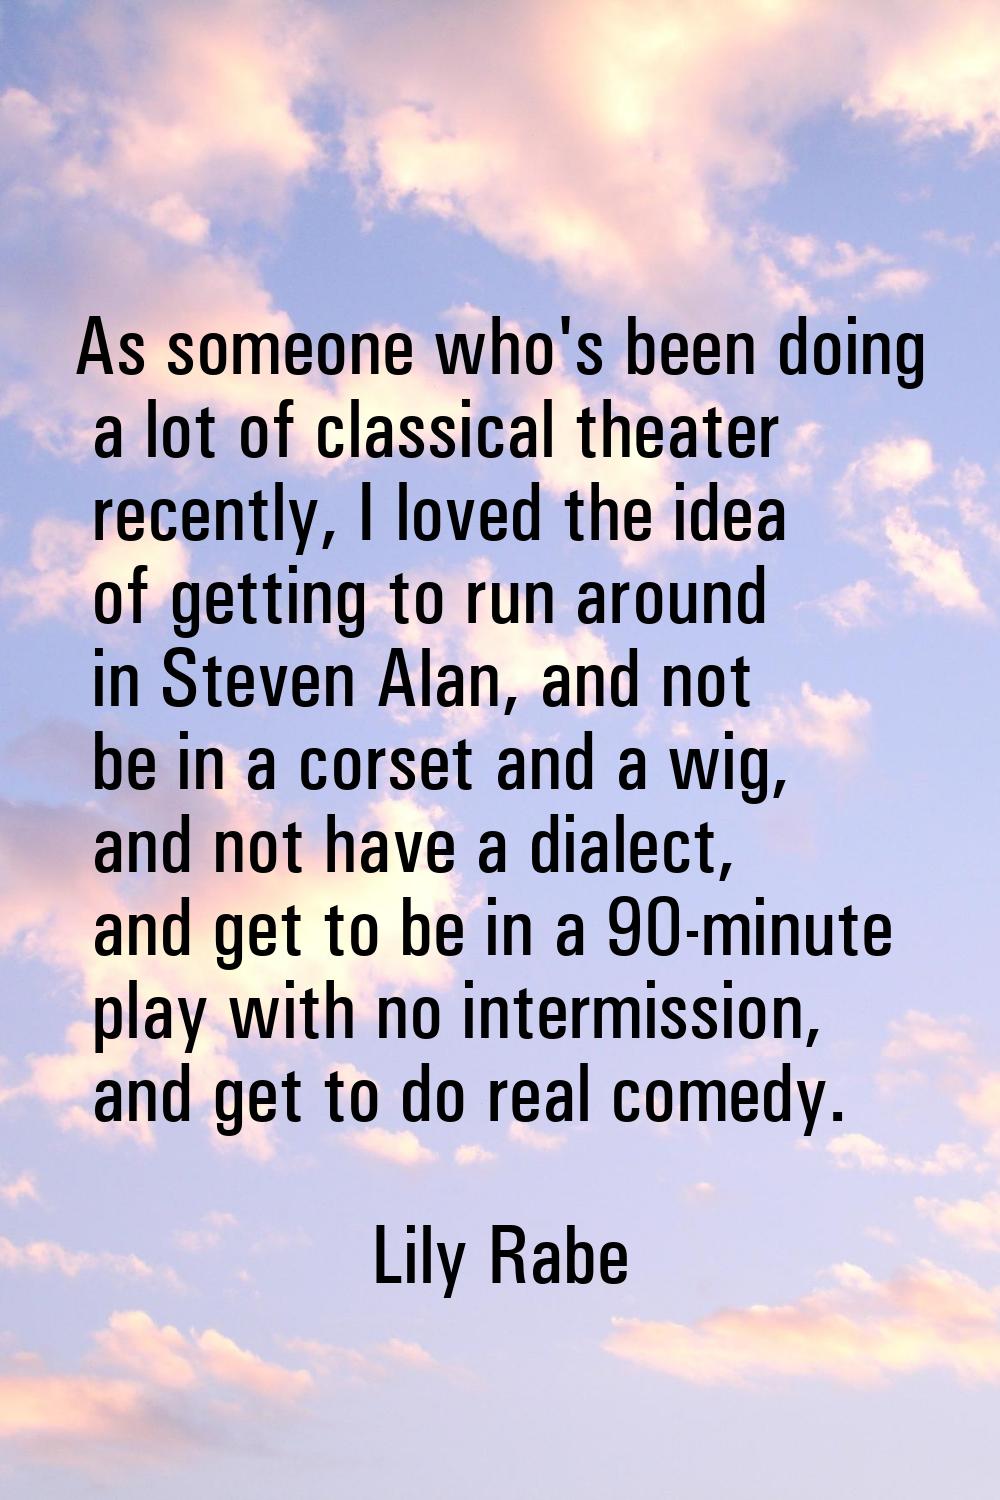 As someone who's been doing a lot of classical theater recently, I loved the idea of getting to run